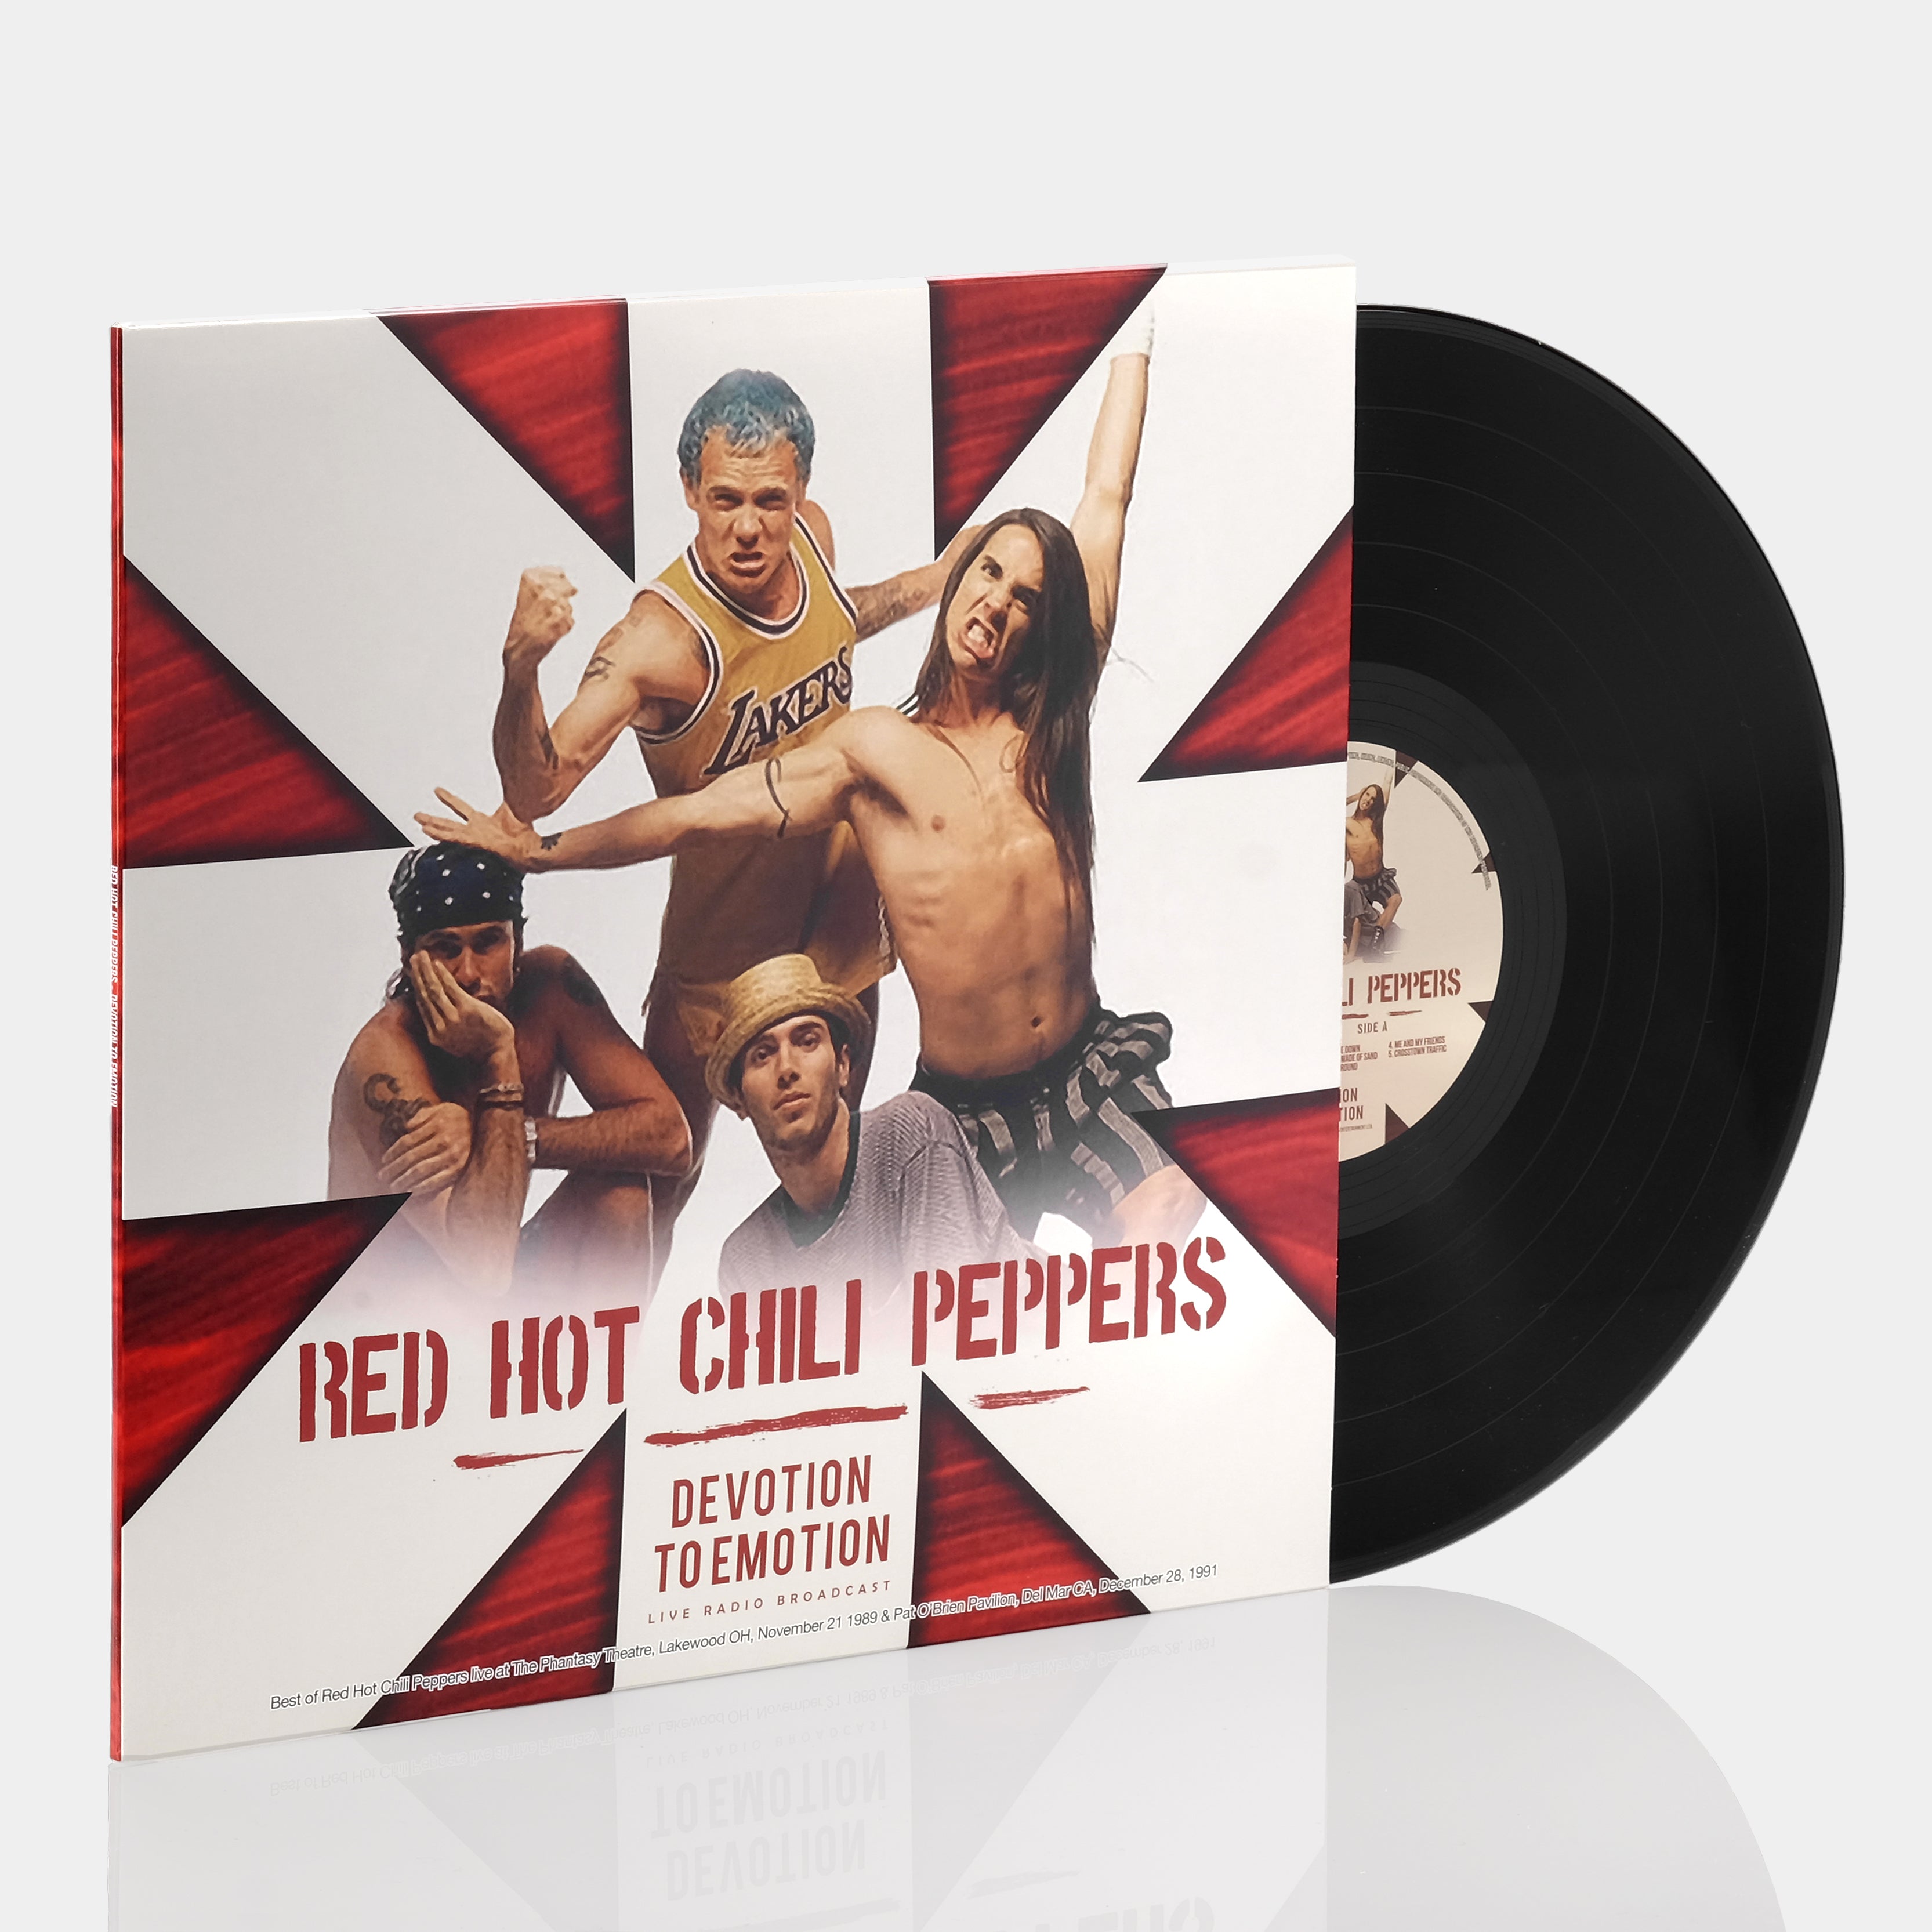 Red Hot Chili Peppers - Devotion To Emotion LP Vinyl Record